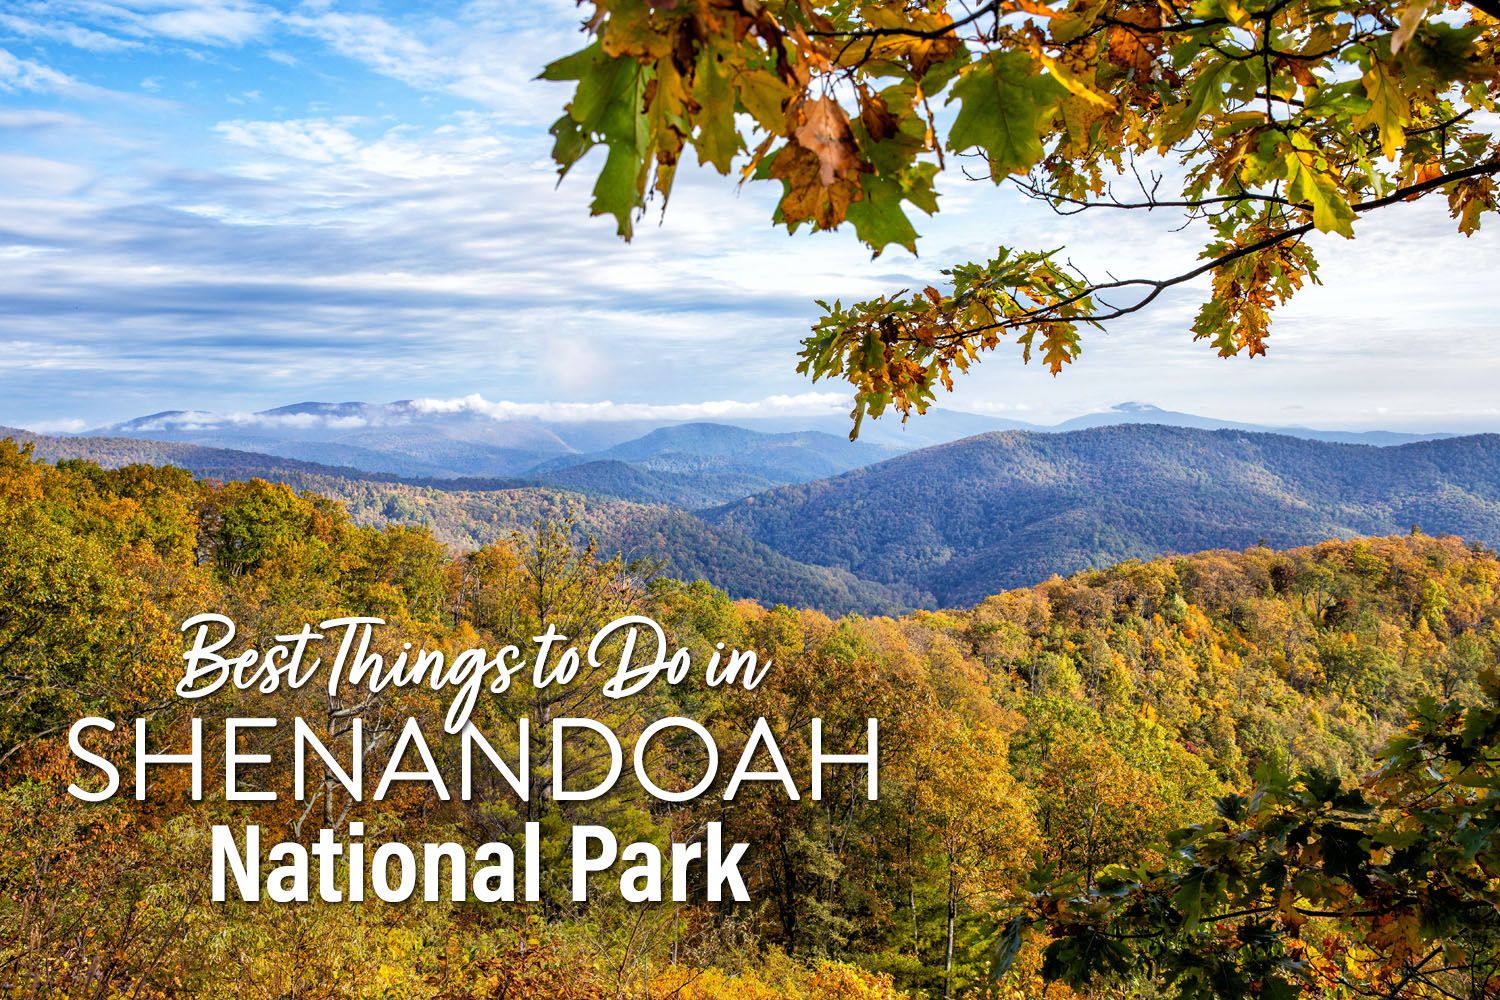 Things to do in Shenandoah